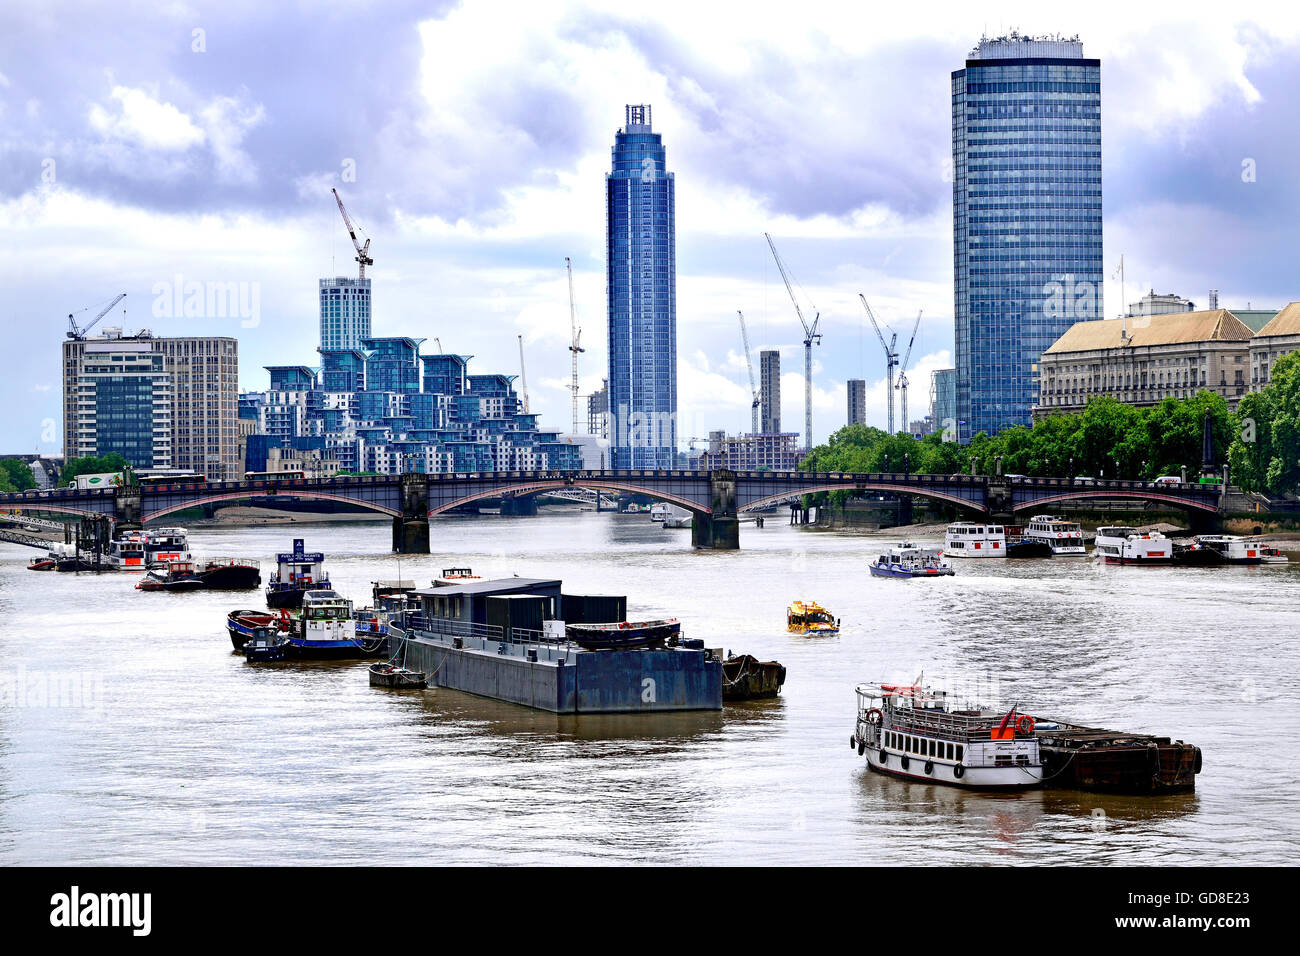 Londres, Angleterre, Royaume-Uni. Tamise, Lambeth Bridge, St George's Wharf et St George's Wharf Tower / Vauxhaul Tower Banque D'Images